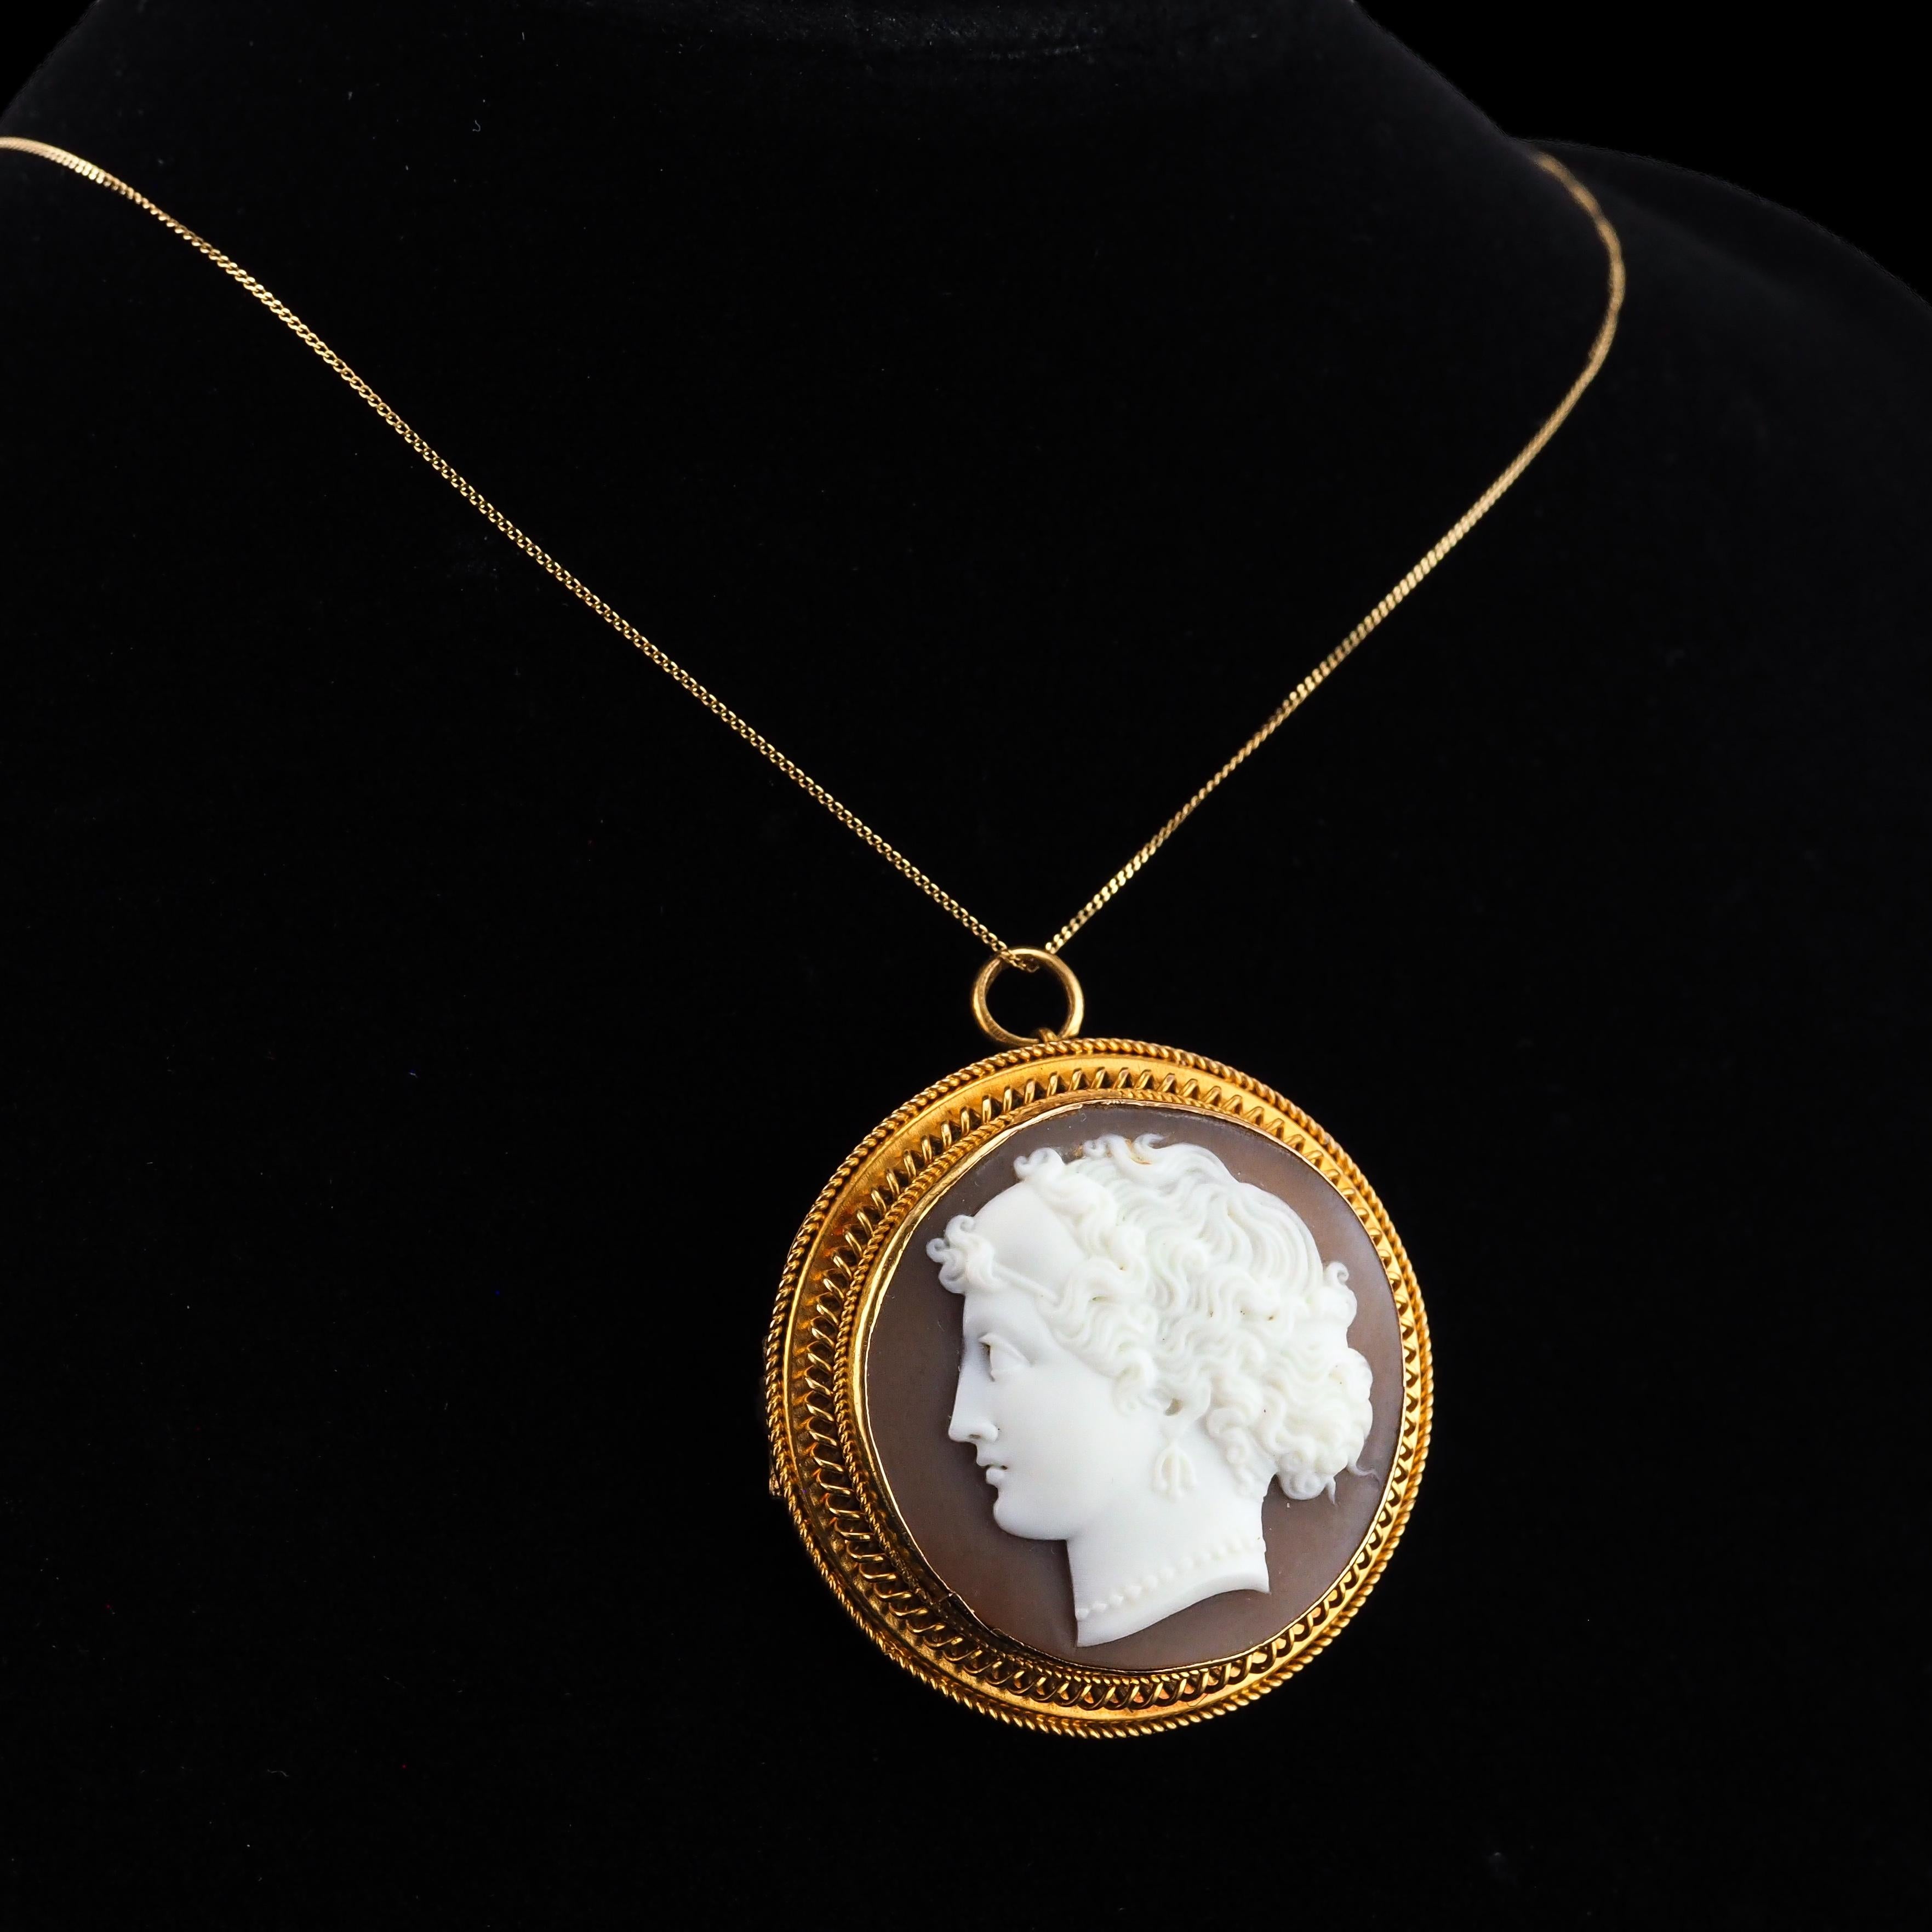 Antique Victorian Cameo 18K Gold Brooch/Pendant Necklace - c.1880 For Sale 12